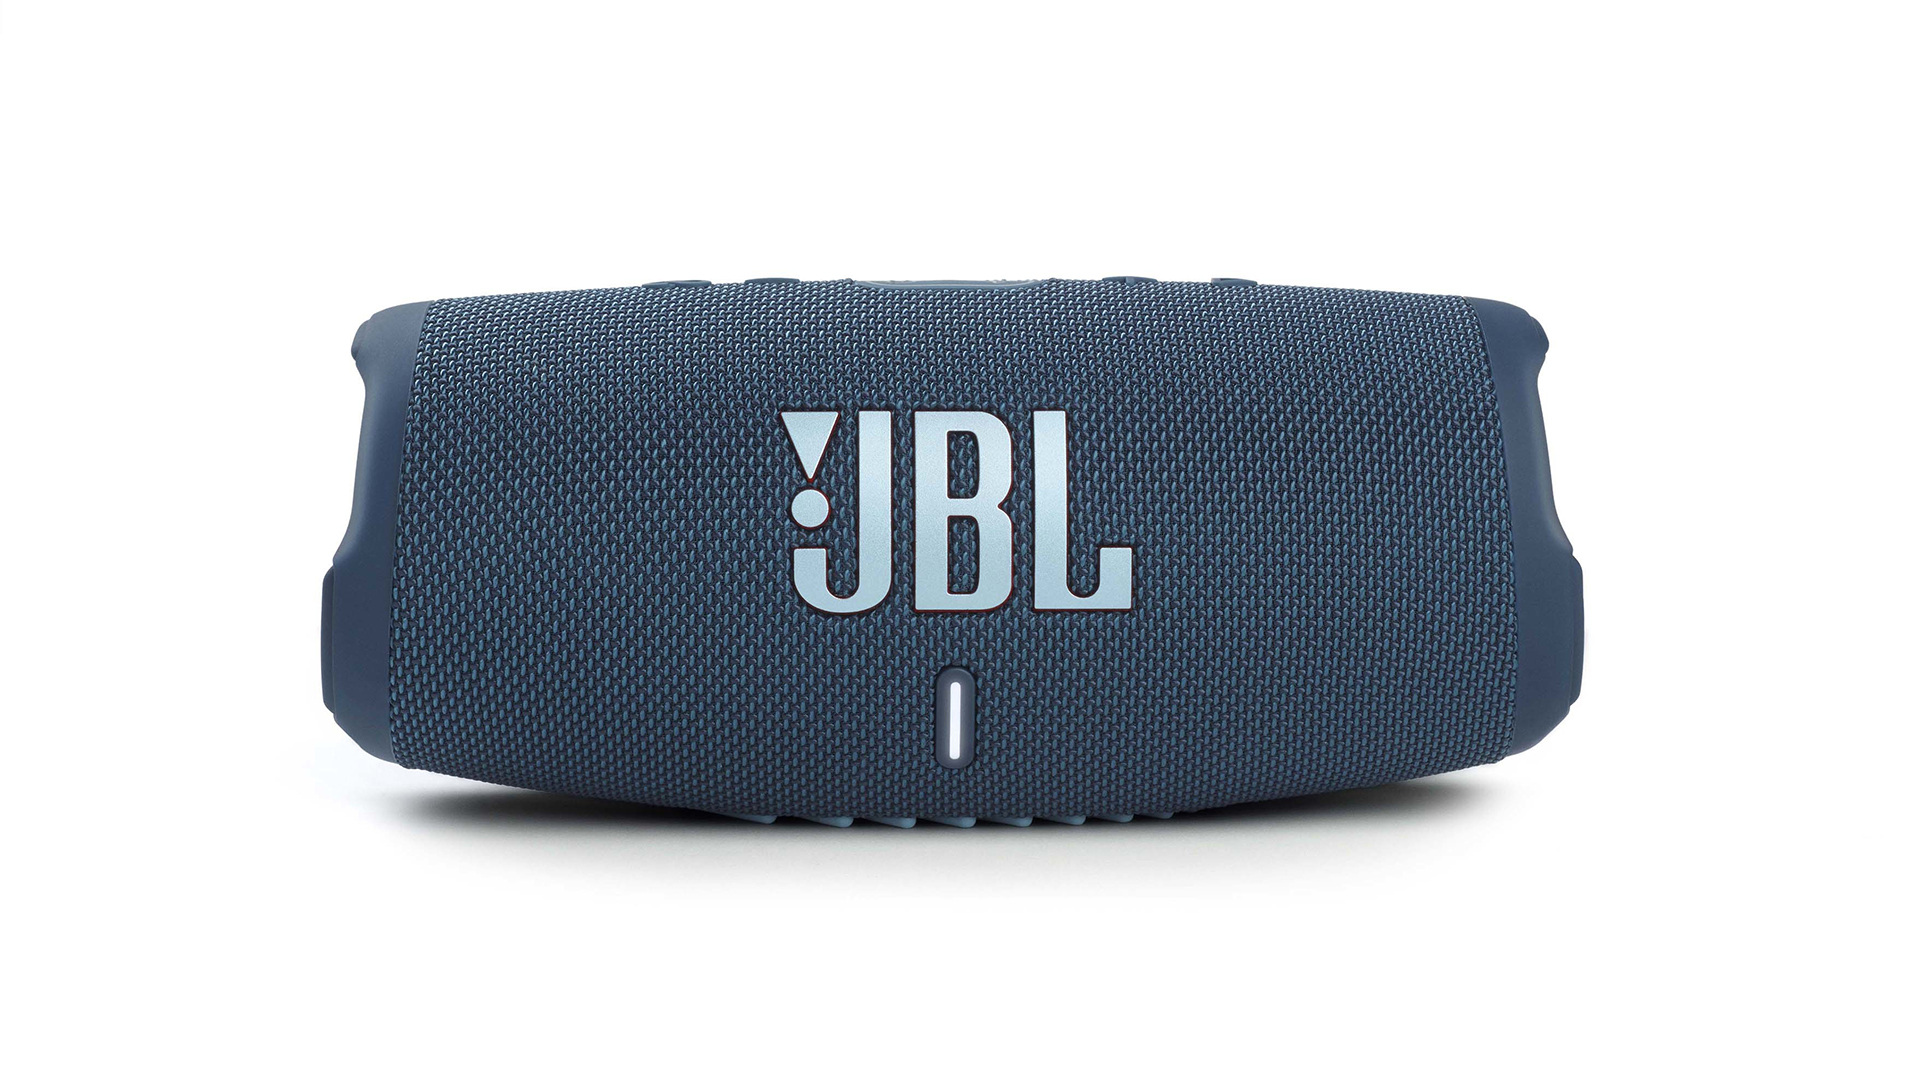 The JBL Charge 5 in navy with the JBL logo in white